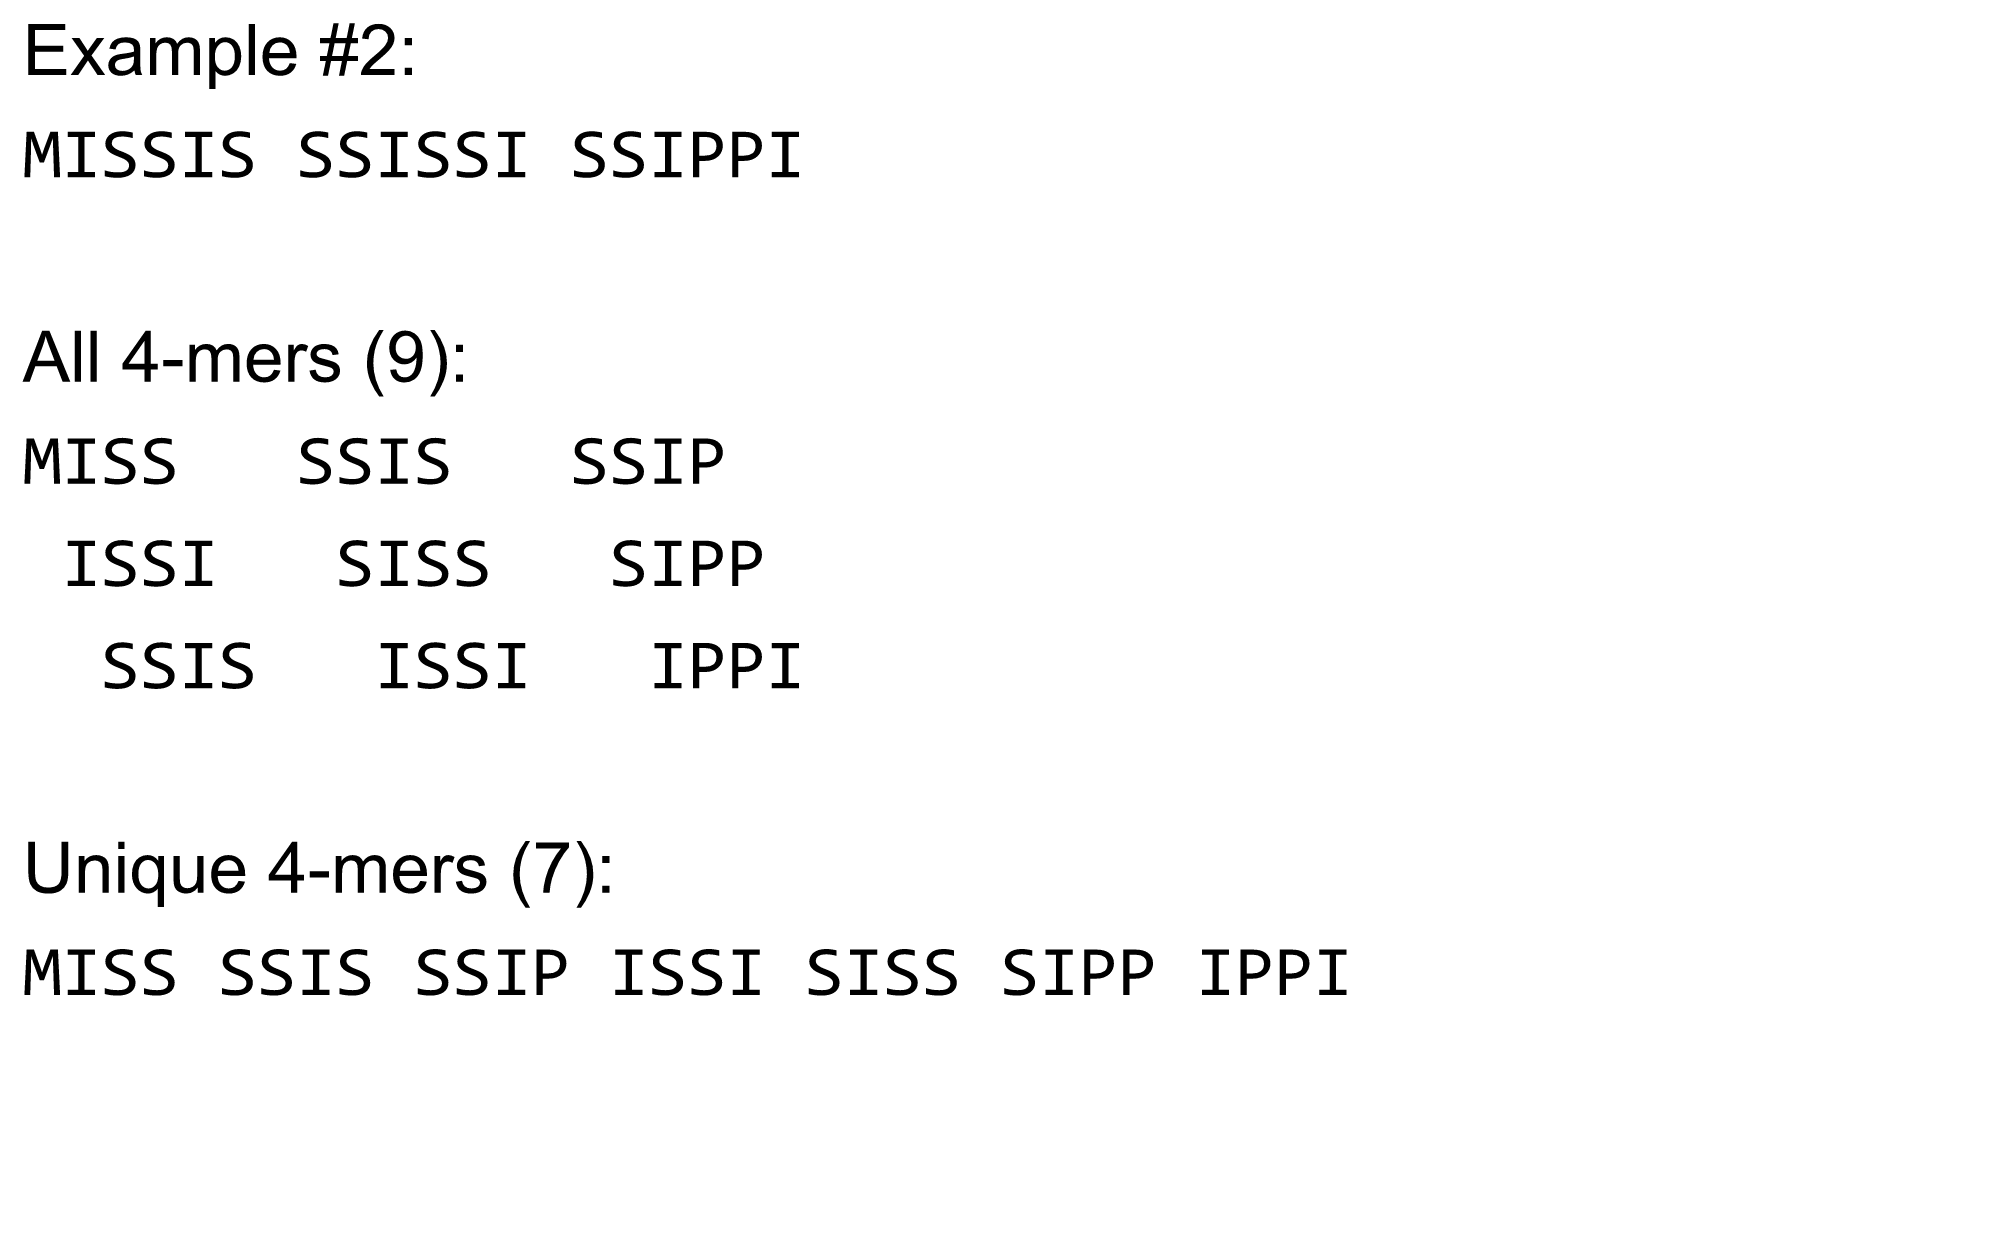 All 4-mers are generated so missis becomes miss, issi, and ssis. These are then uniqued to get 7 unique 4-mers.